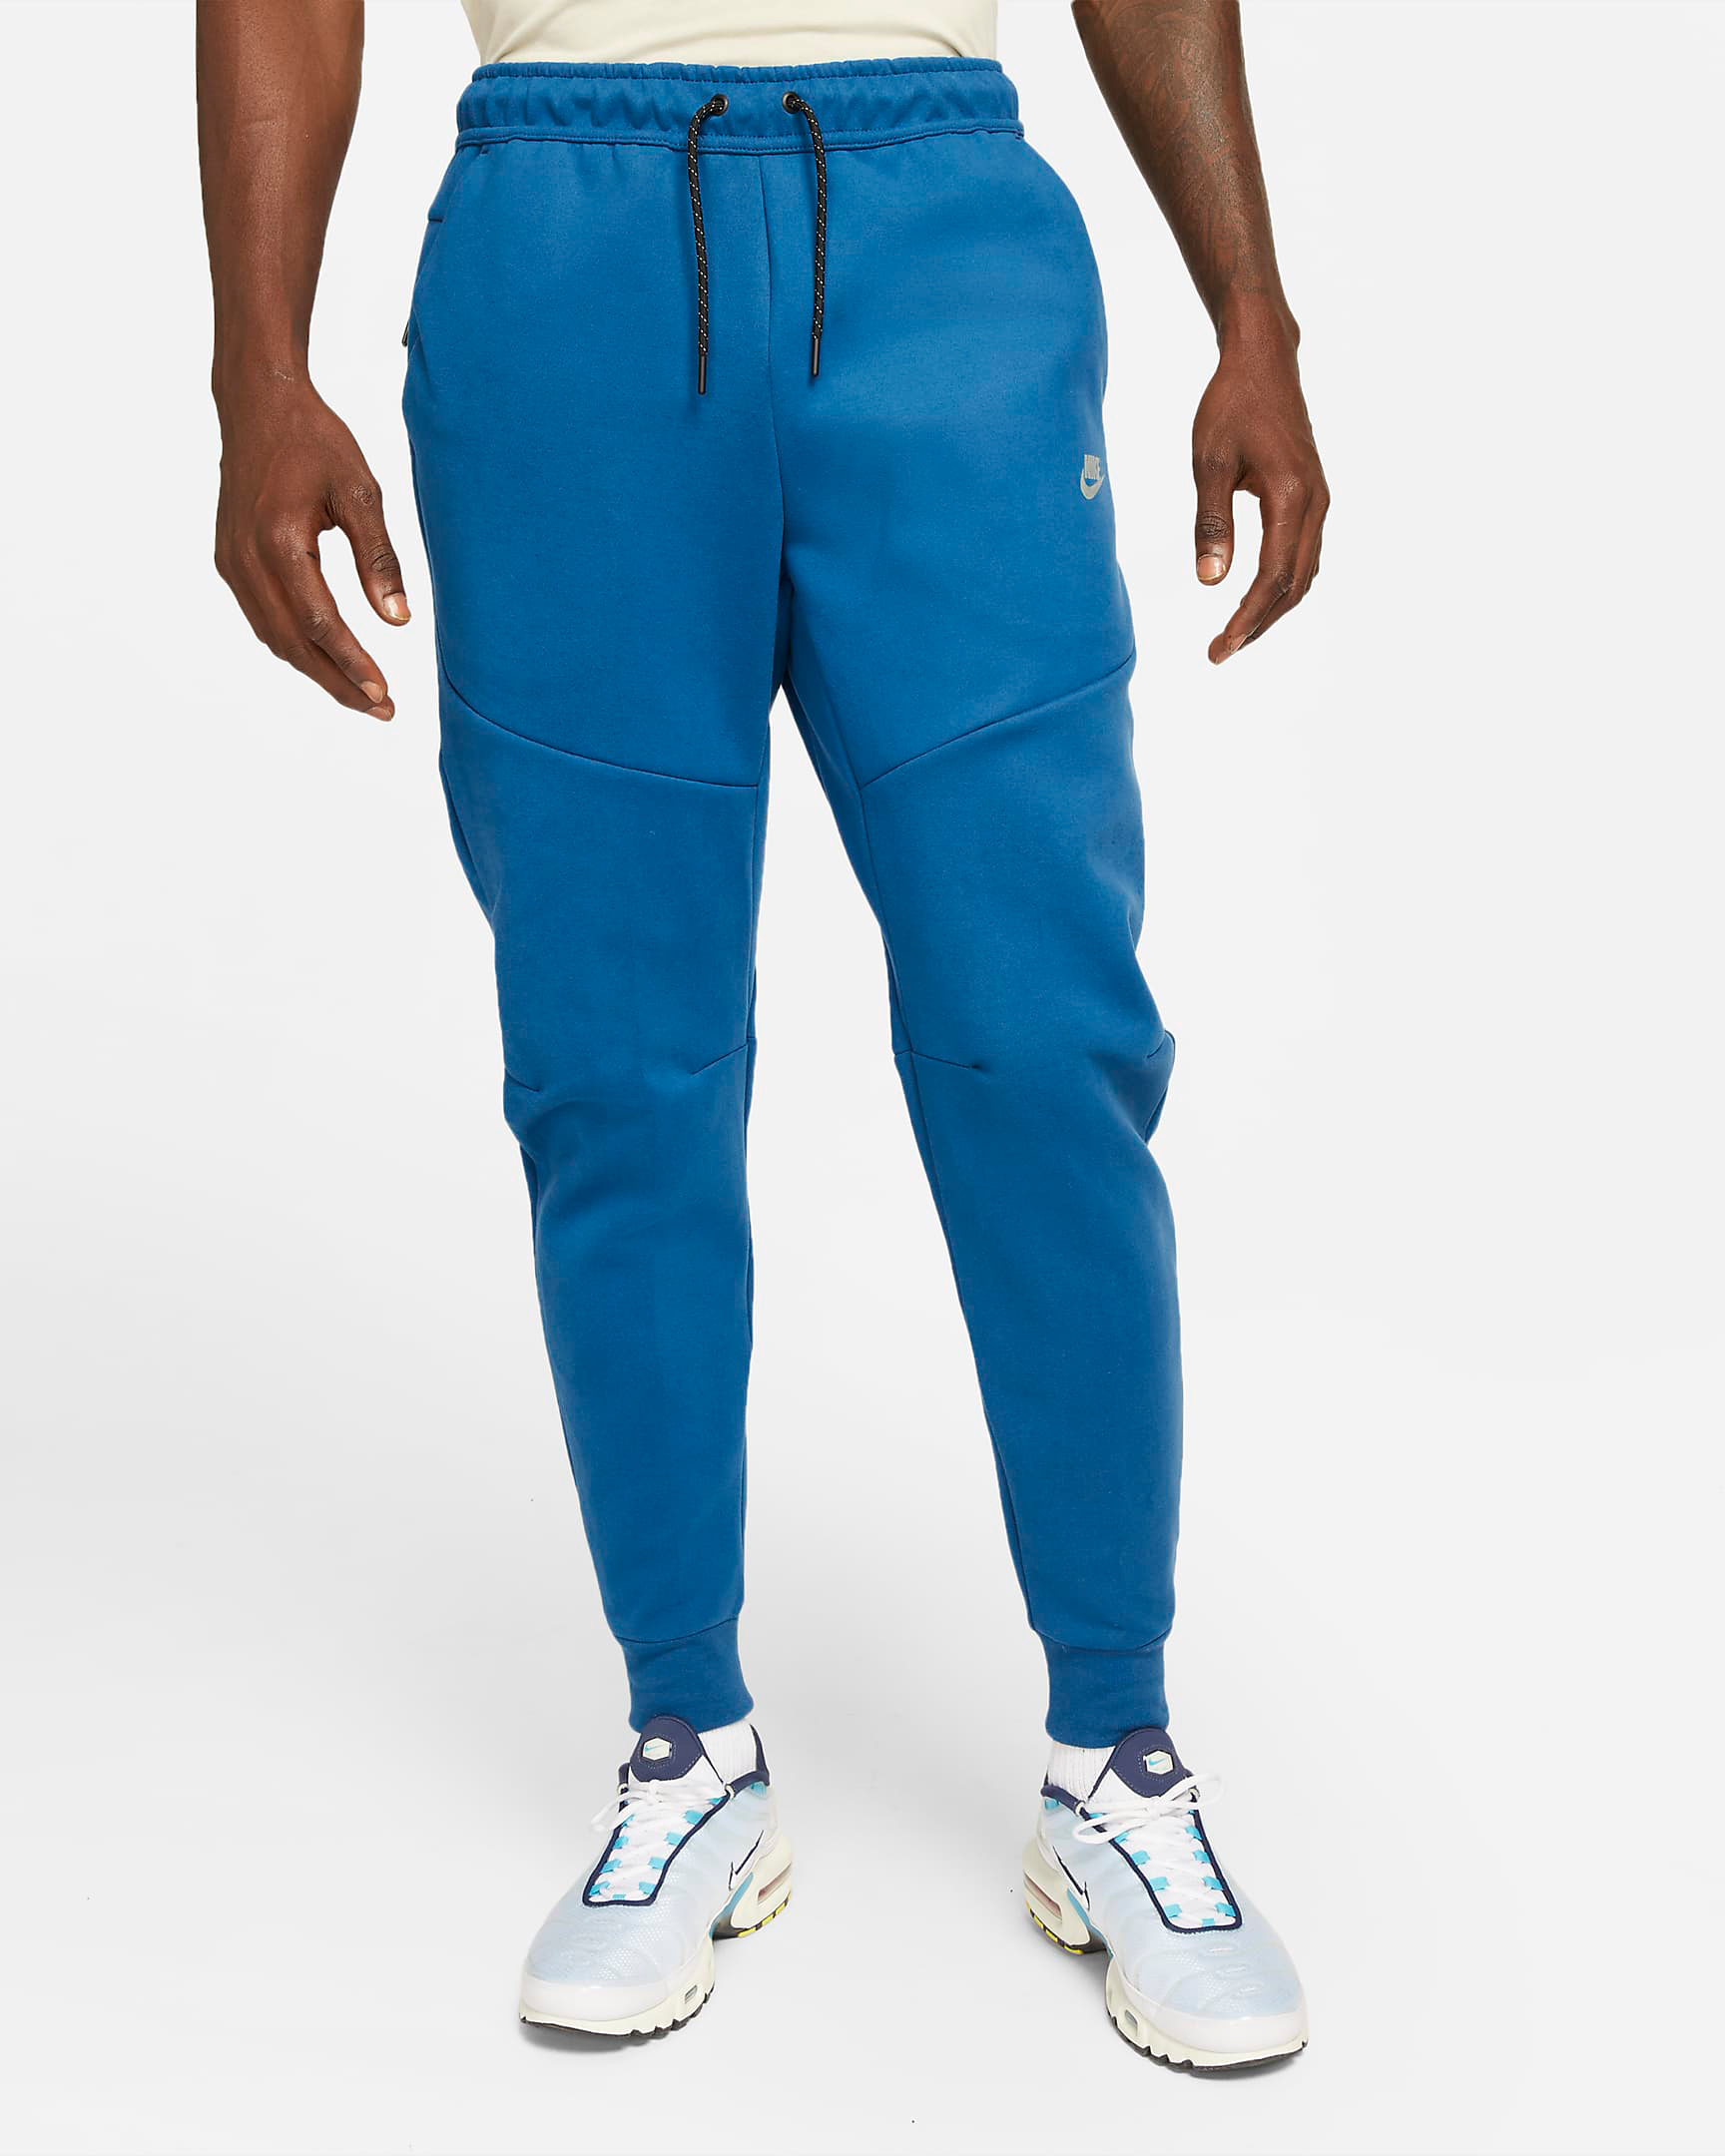 Nike Tech Fleece Jogger Pants in Court Blue and Black